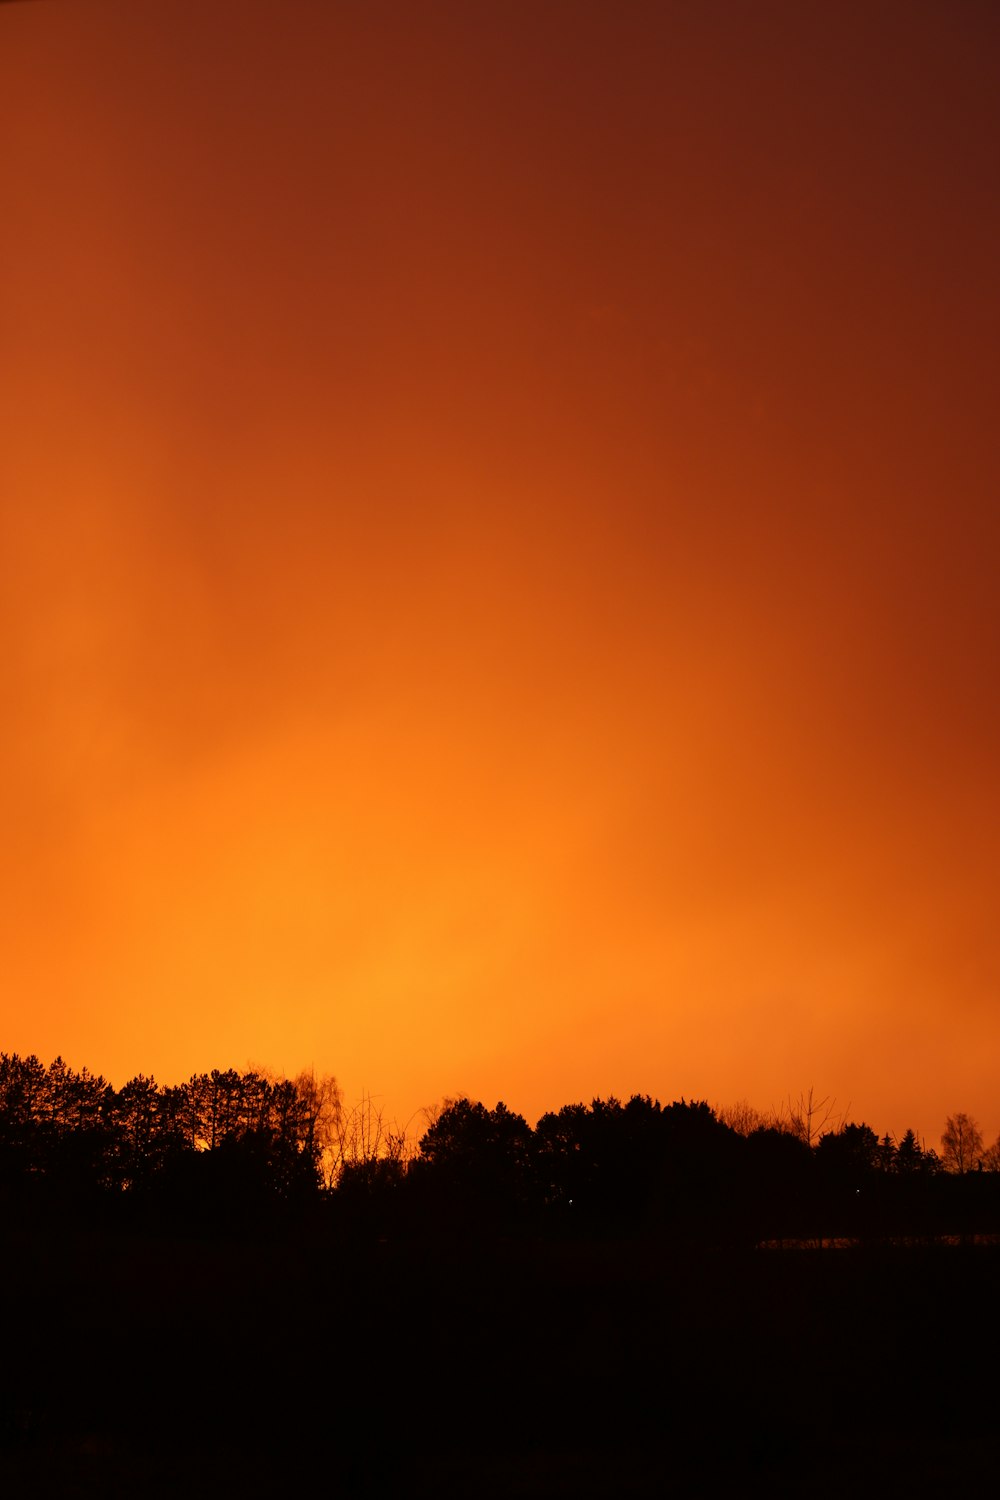 an orange sky with trees in the background